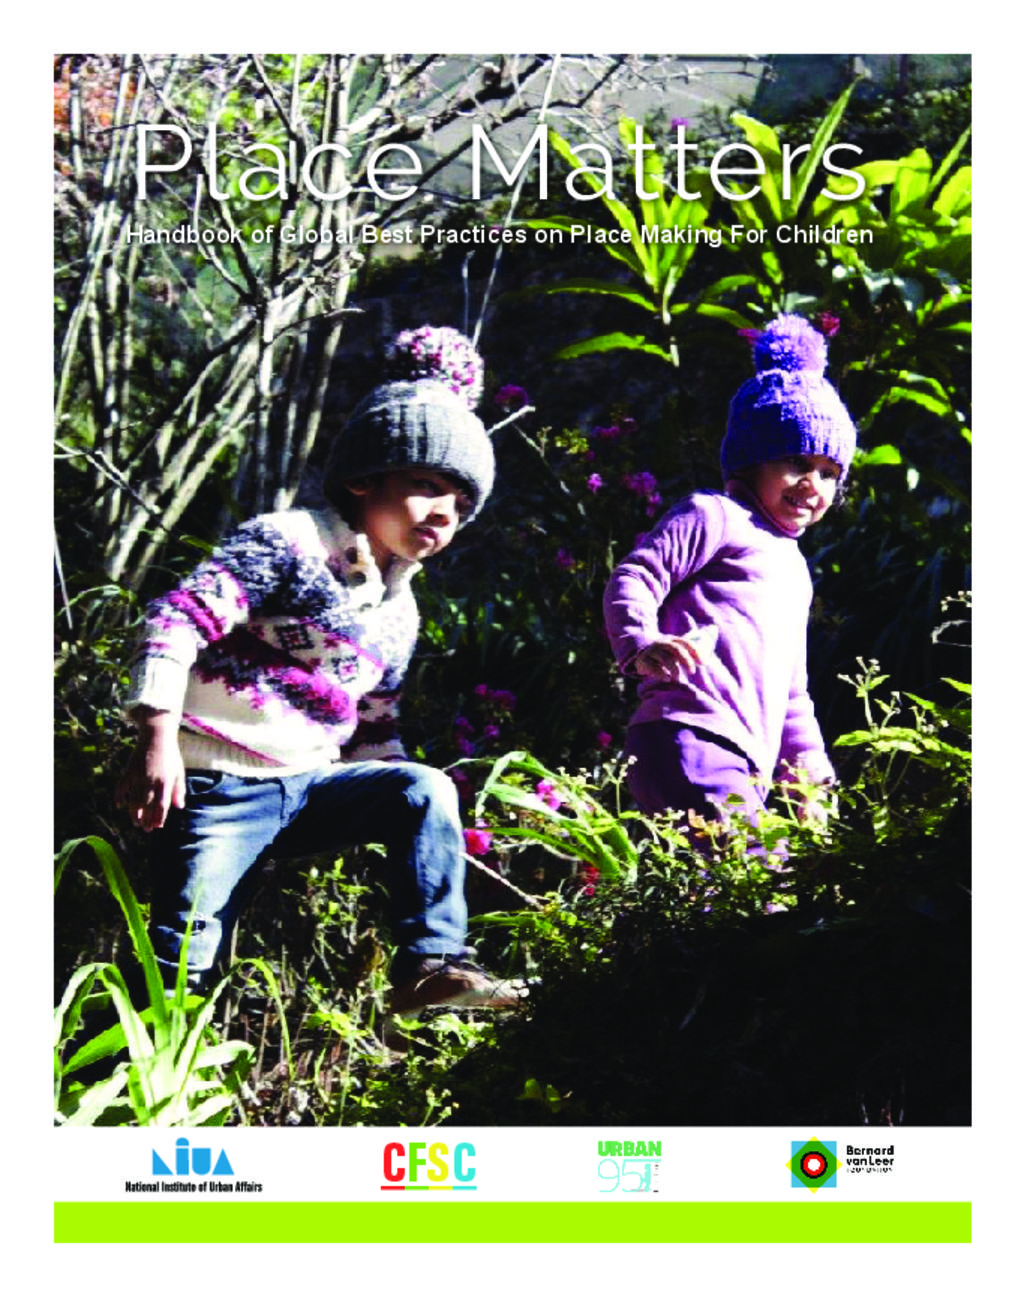 Handbook of Global Practices on Place Making for Children